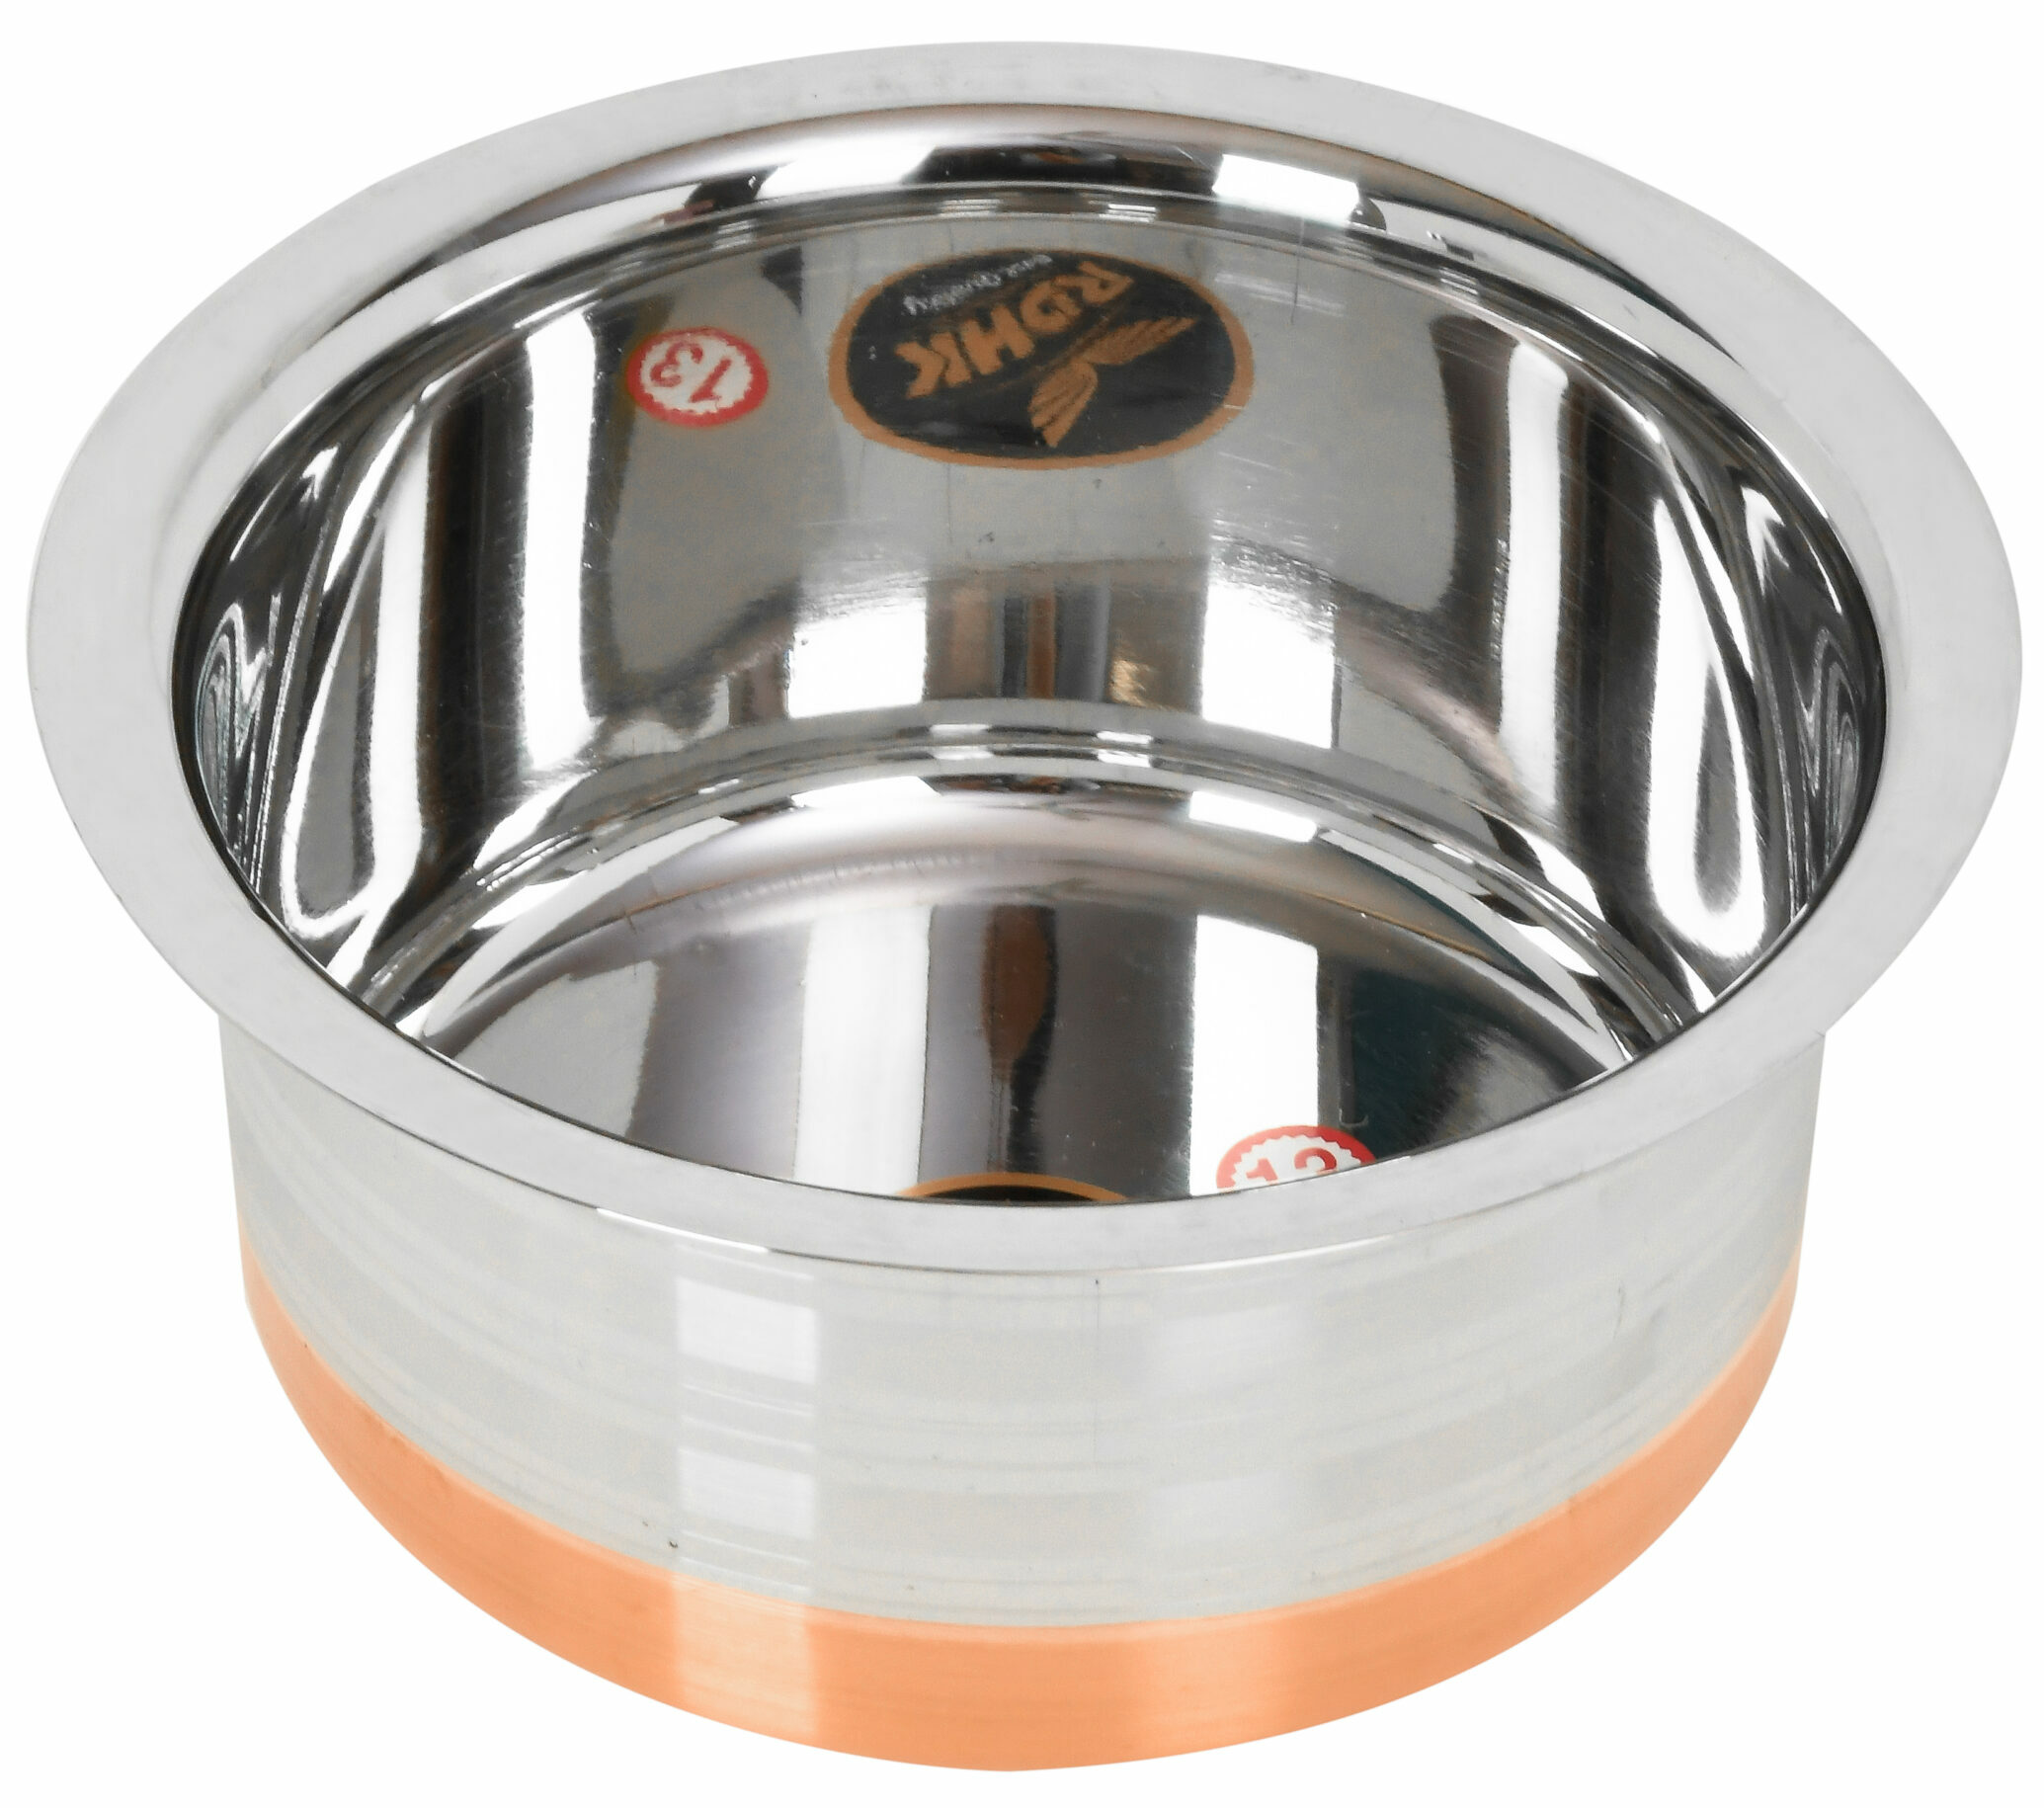 Stainless Steel Copper Base Patila 13 No